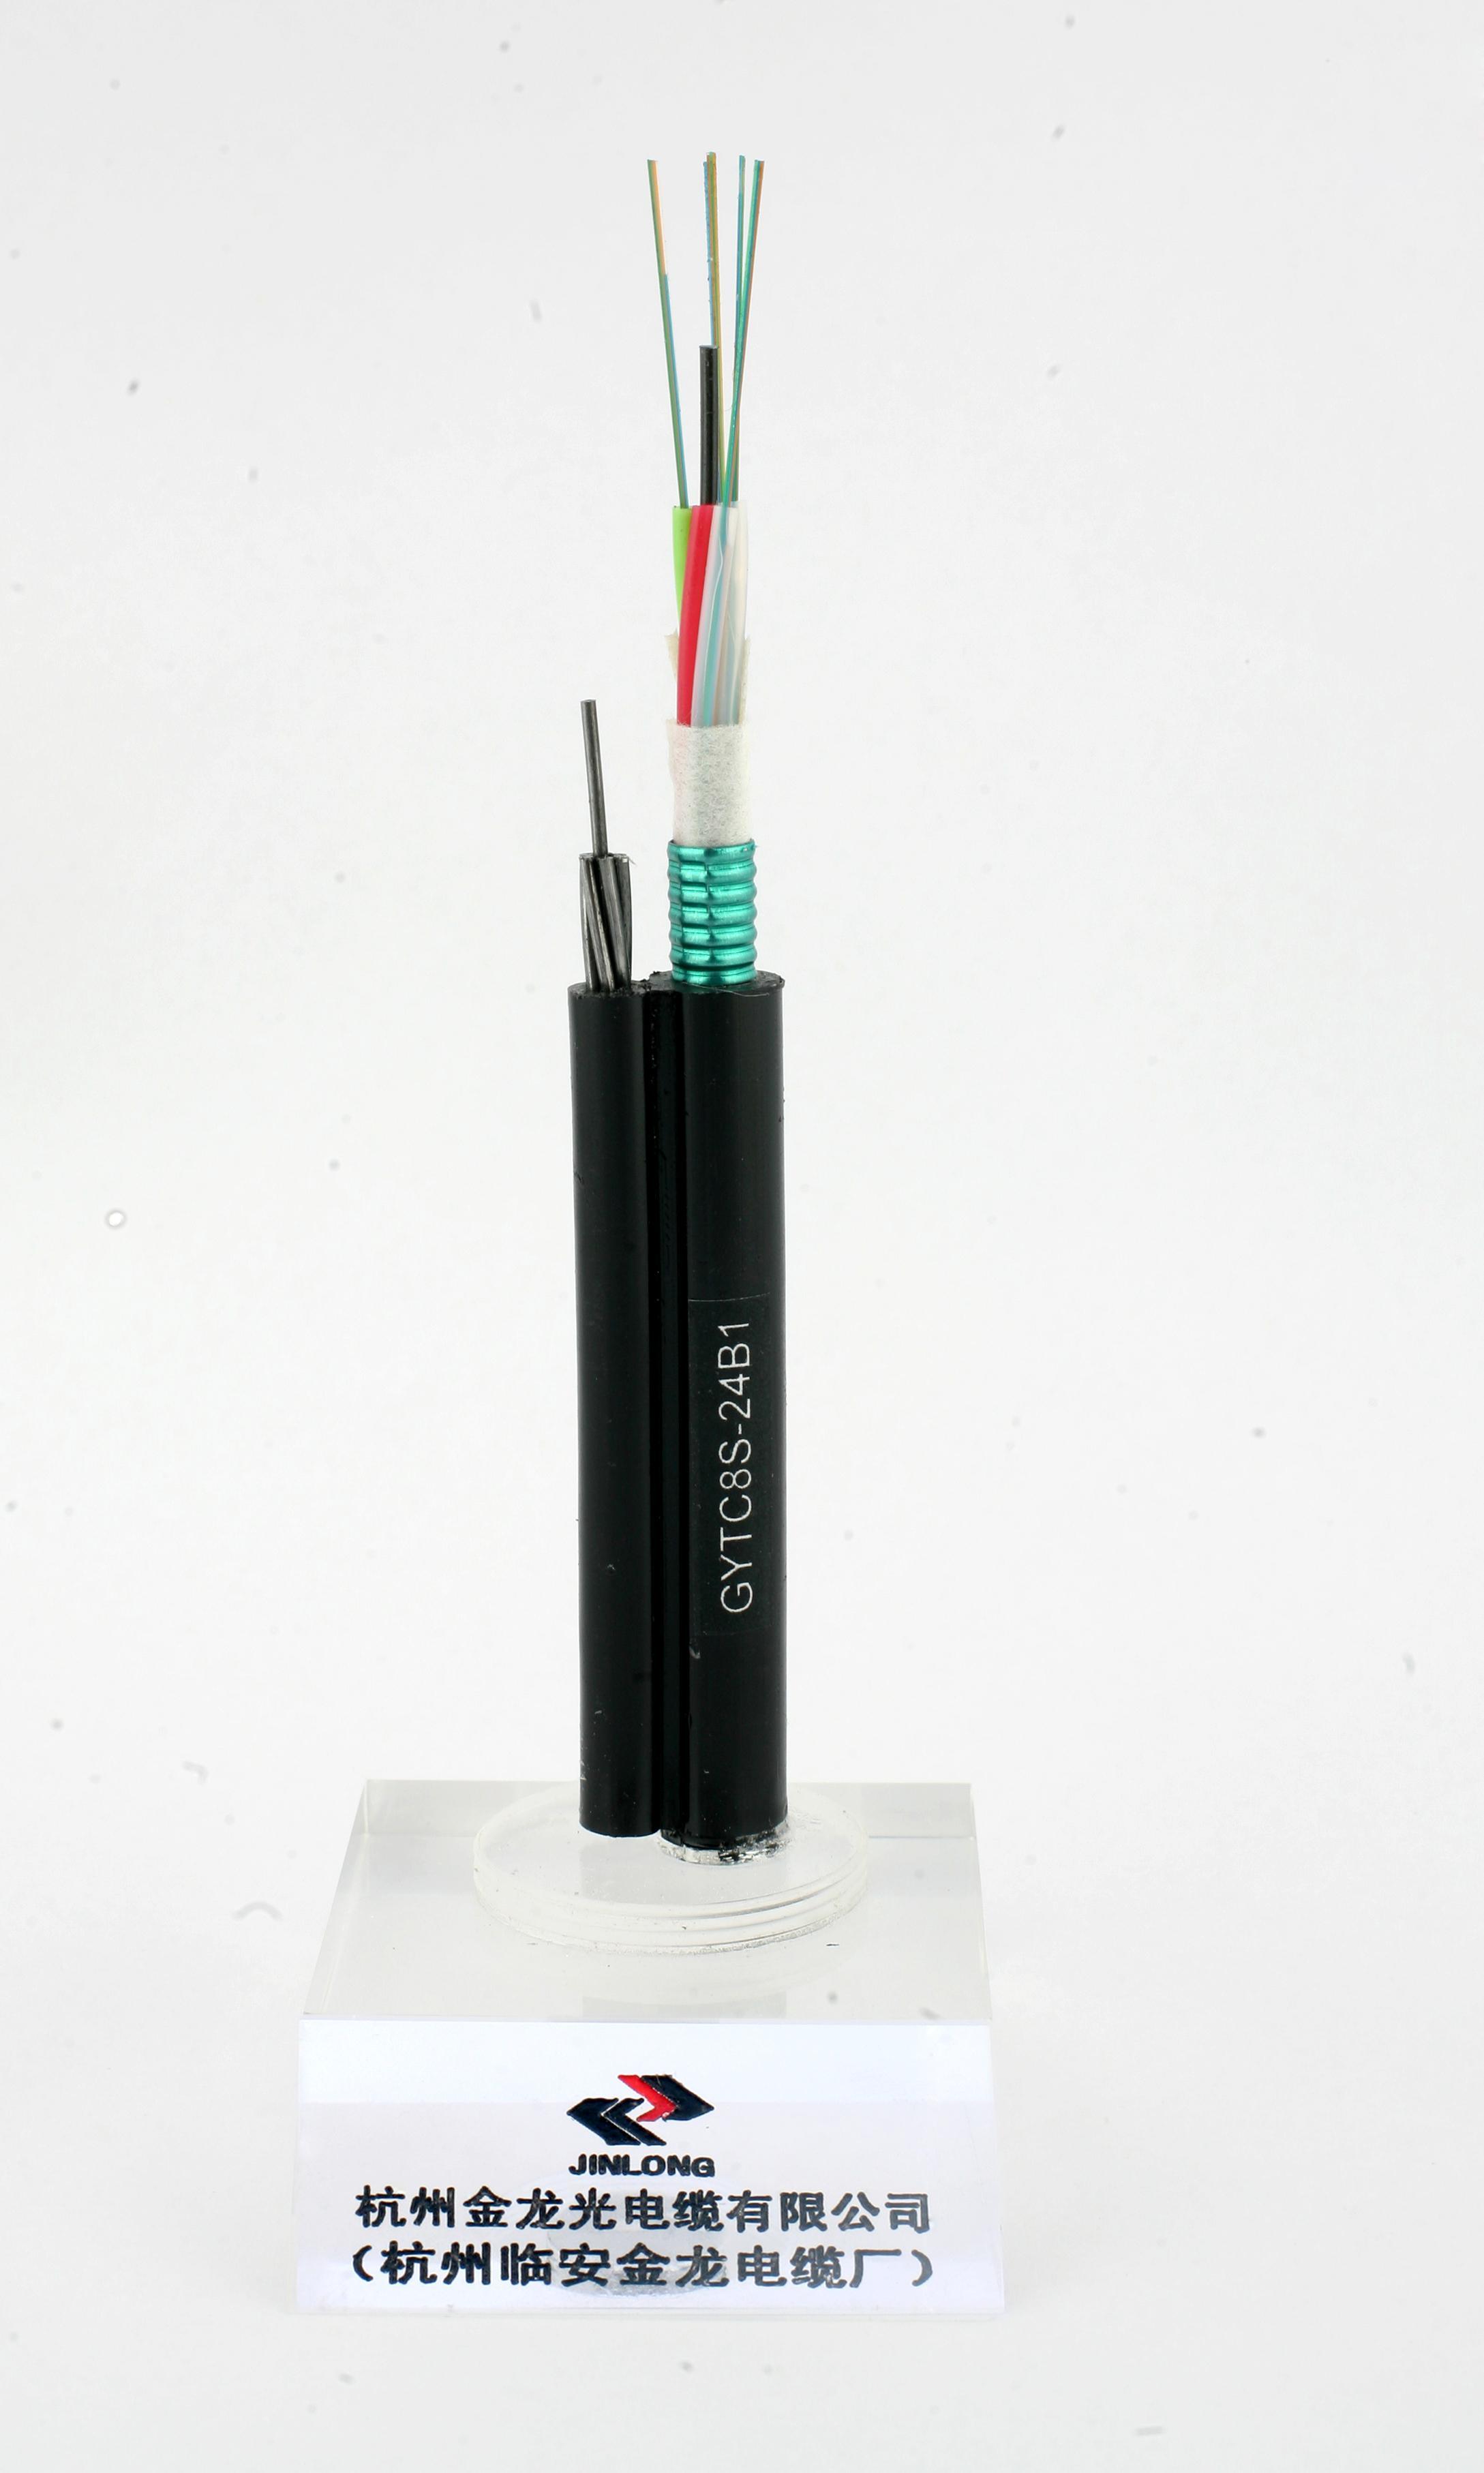 Gytc8s Figure-8 Self-Supporting Type 24core Fiber Optical Cable